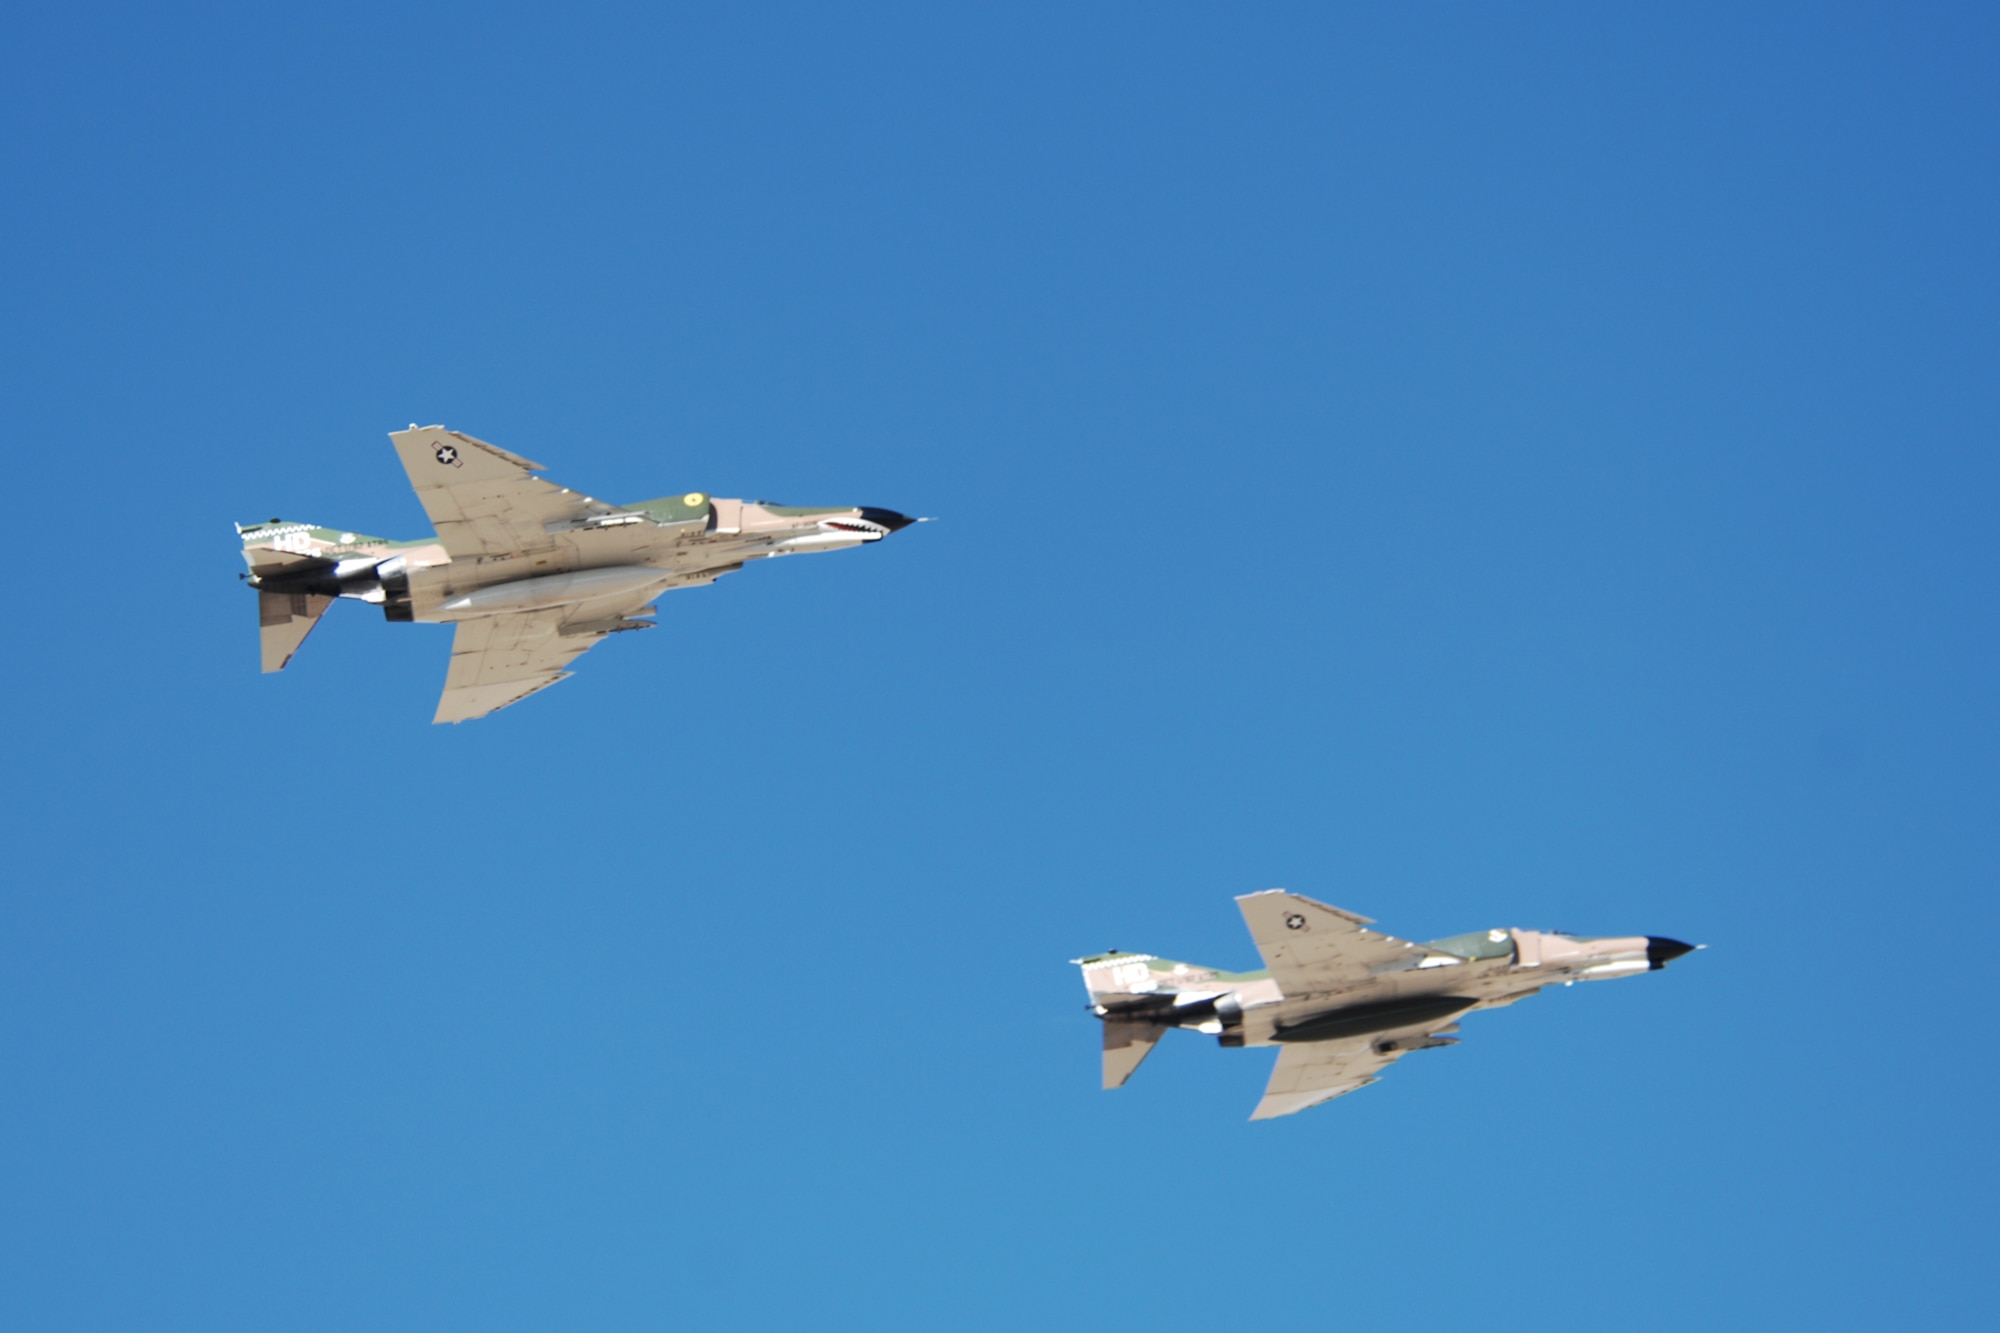 Brig. Gen. David Goldfein, 49th Fighter Wing commander, and Lt. Col. Joel Rush, Detachment 1, 82nd Aerial Targets Squadron commander, fly F-4 Phantoms over the skies of Holloman Air Force Base, N.M., Dec. 20, 2007. The Phantom was designed and manufactured by the McDonnell Douglas aviation company. (U.S. Air Force photo/Airman 1st Class Jamal D. Sutter)